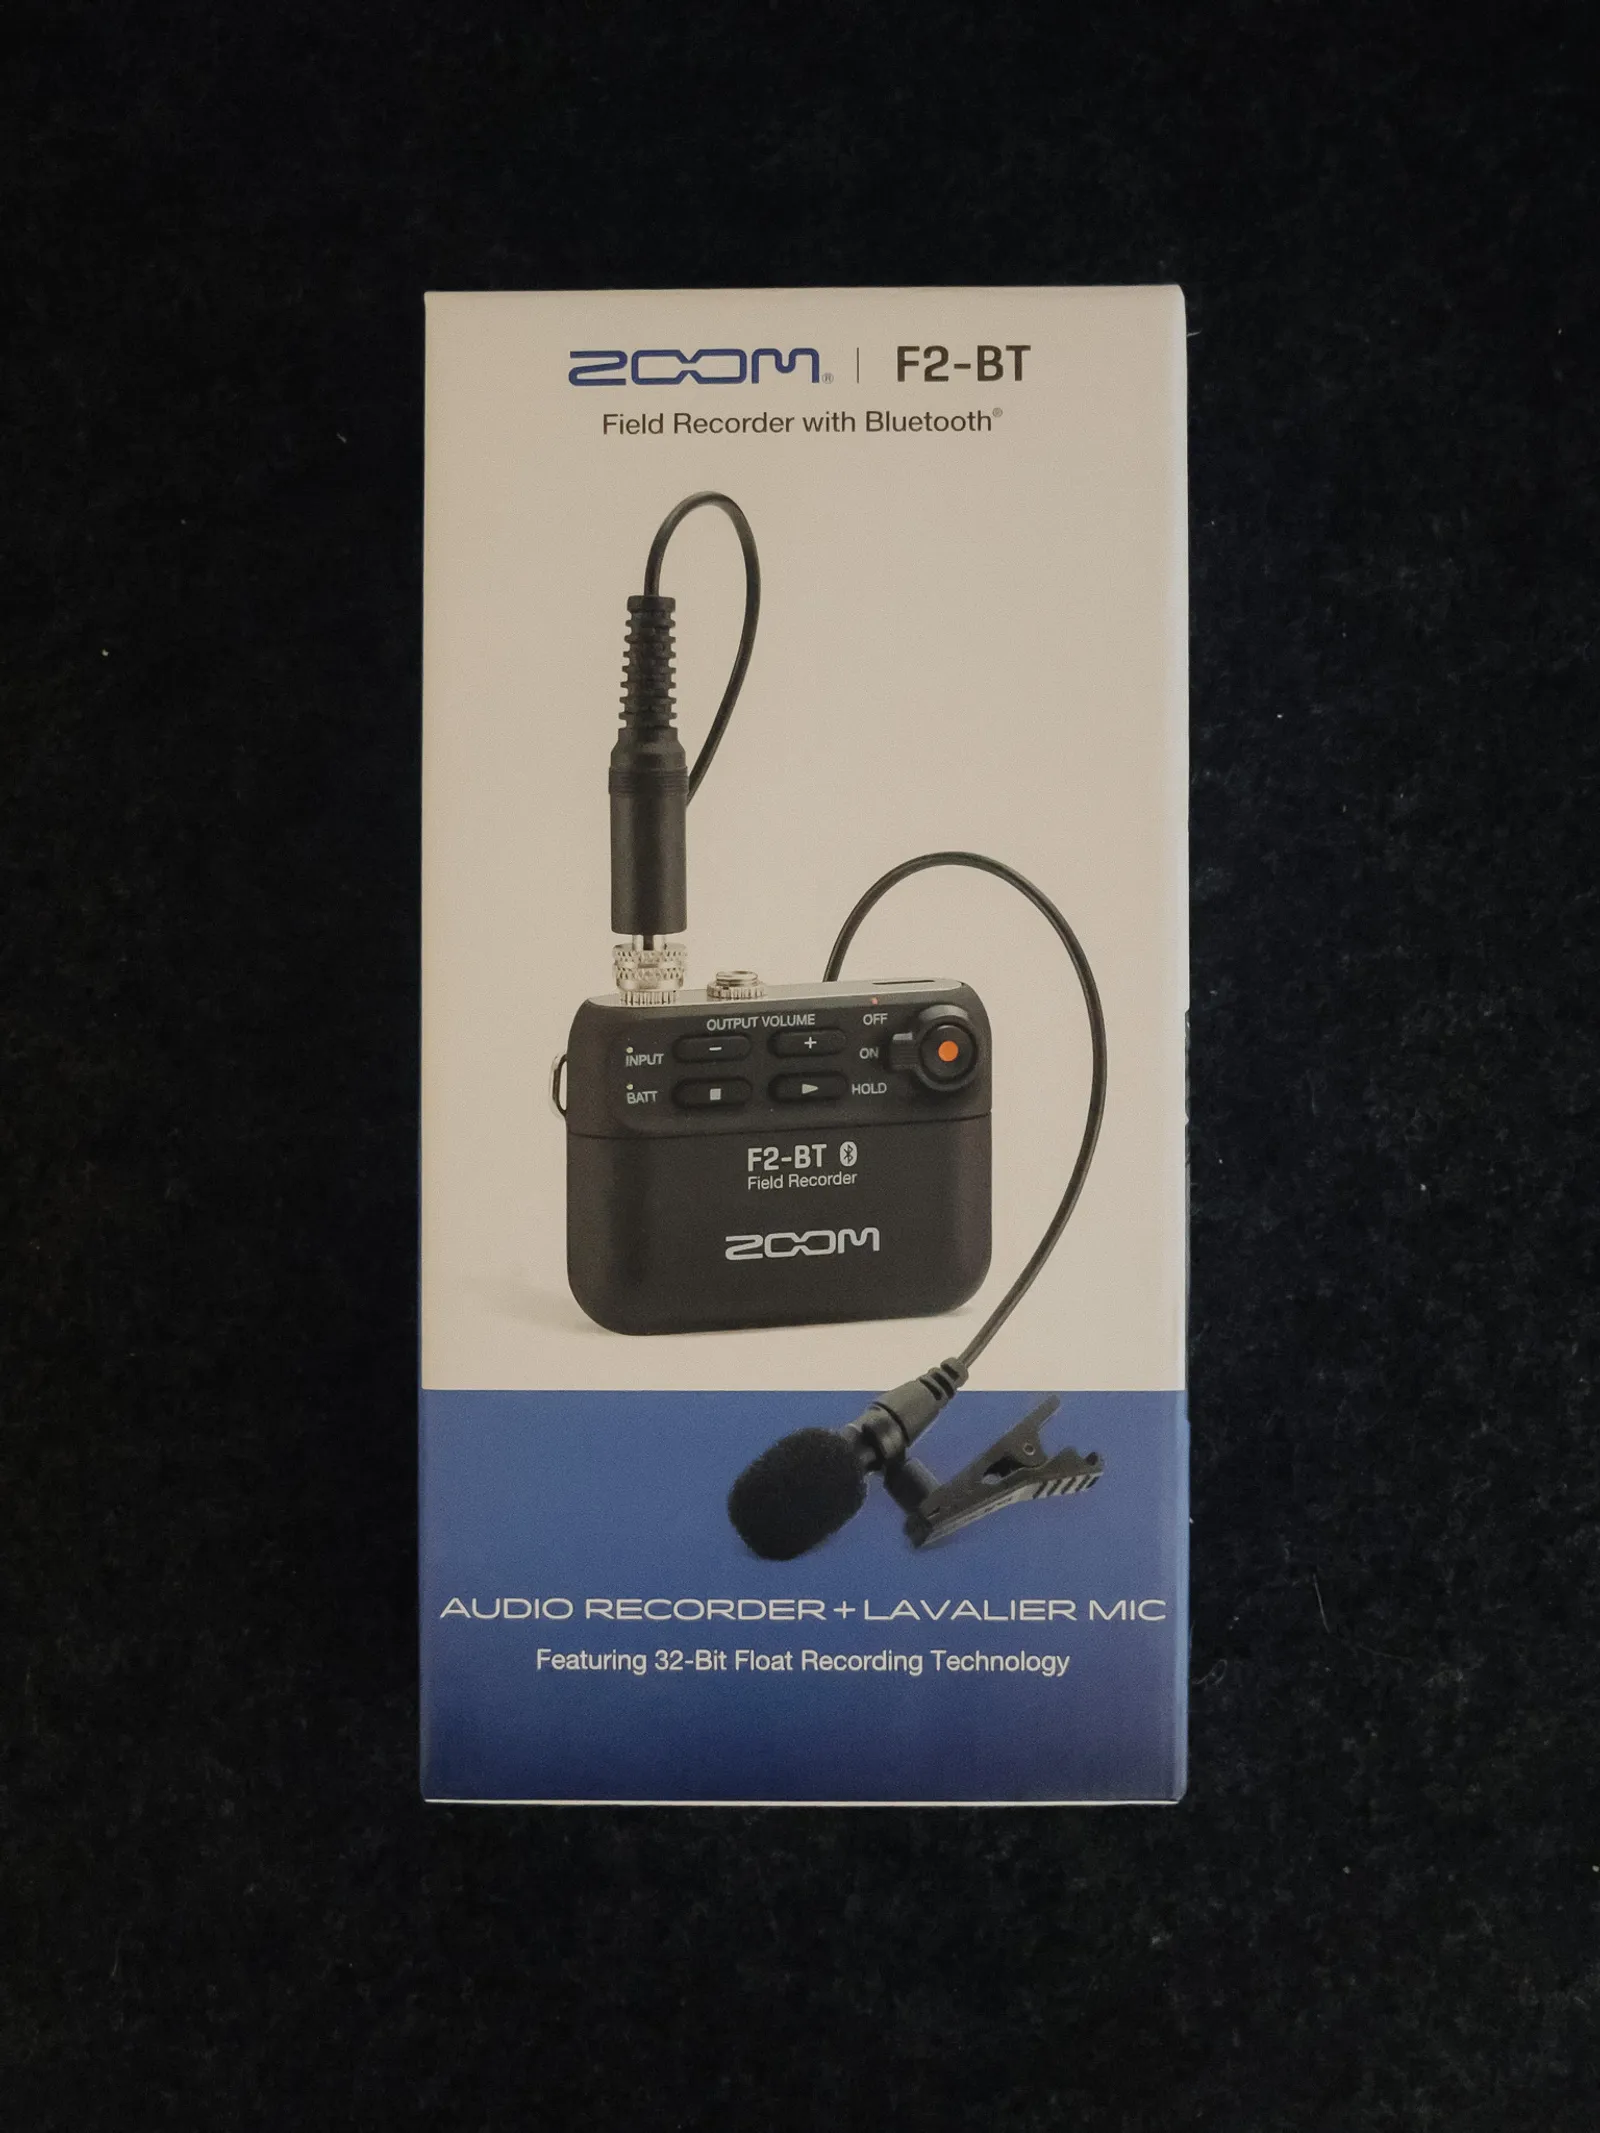 Zoom F2-BT Ultracompact Bluetooth-Enabled Portable Field Recorder with Lavalier Microphone with Sennheiser ME 2 Omnidirectional Lavalier Microphone with Locking 3.5mm Connector (Black)